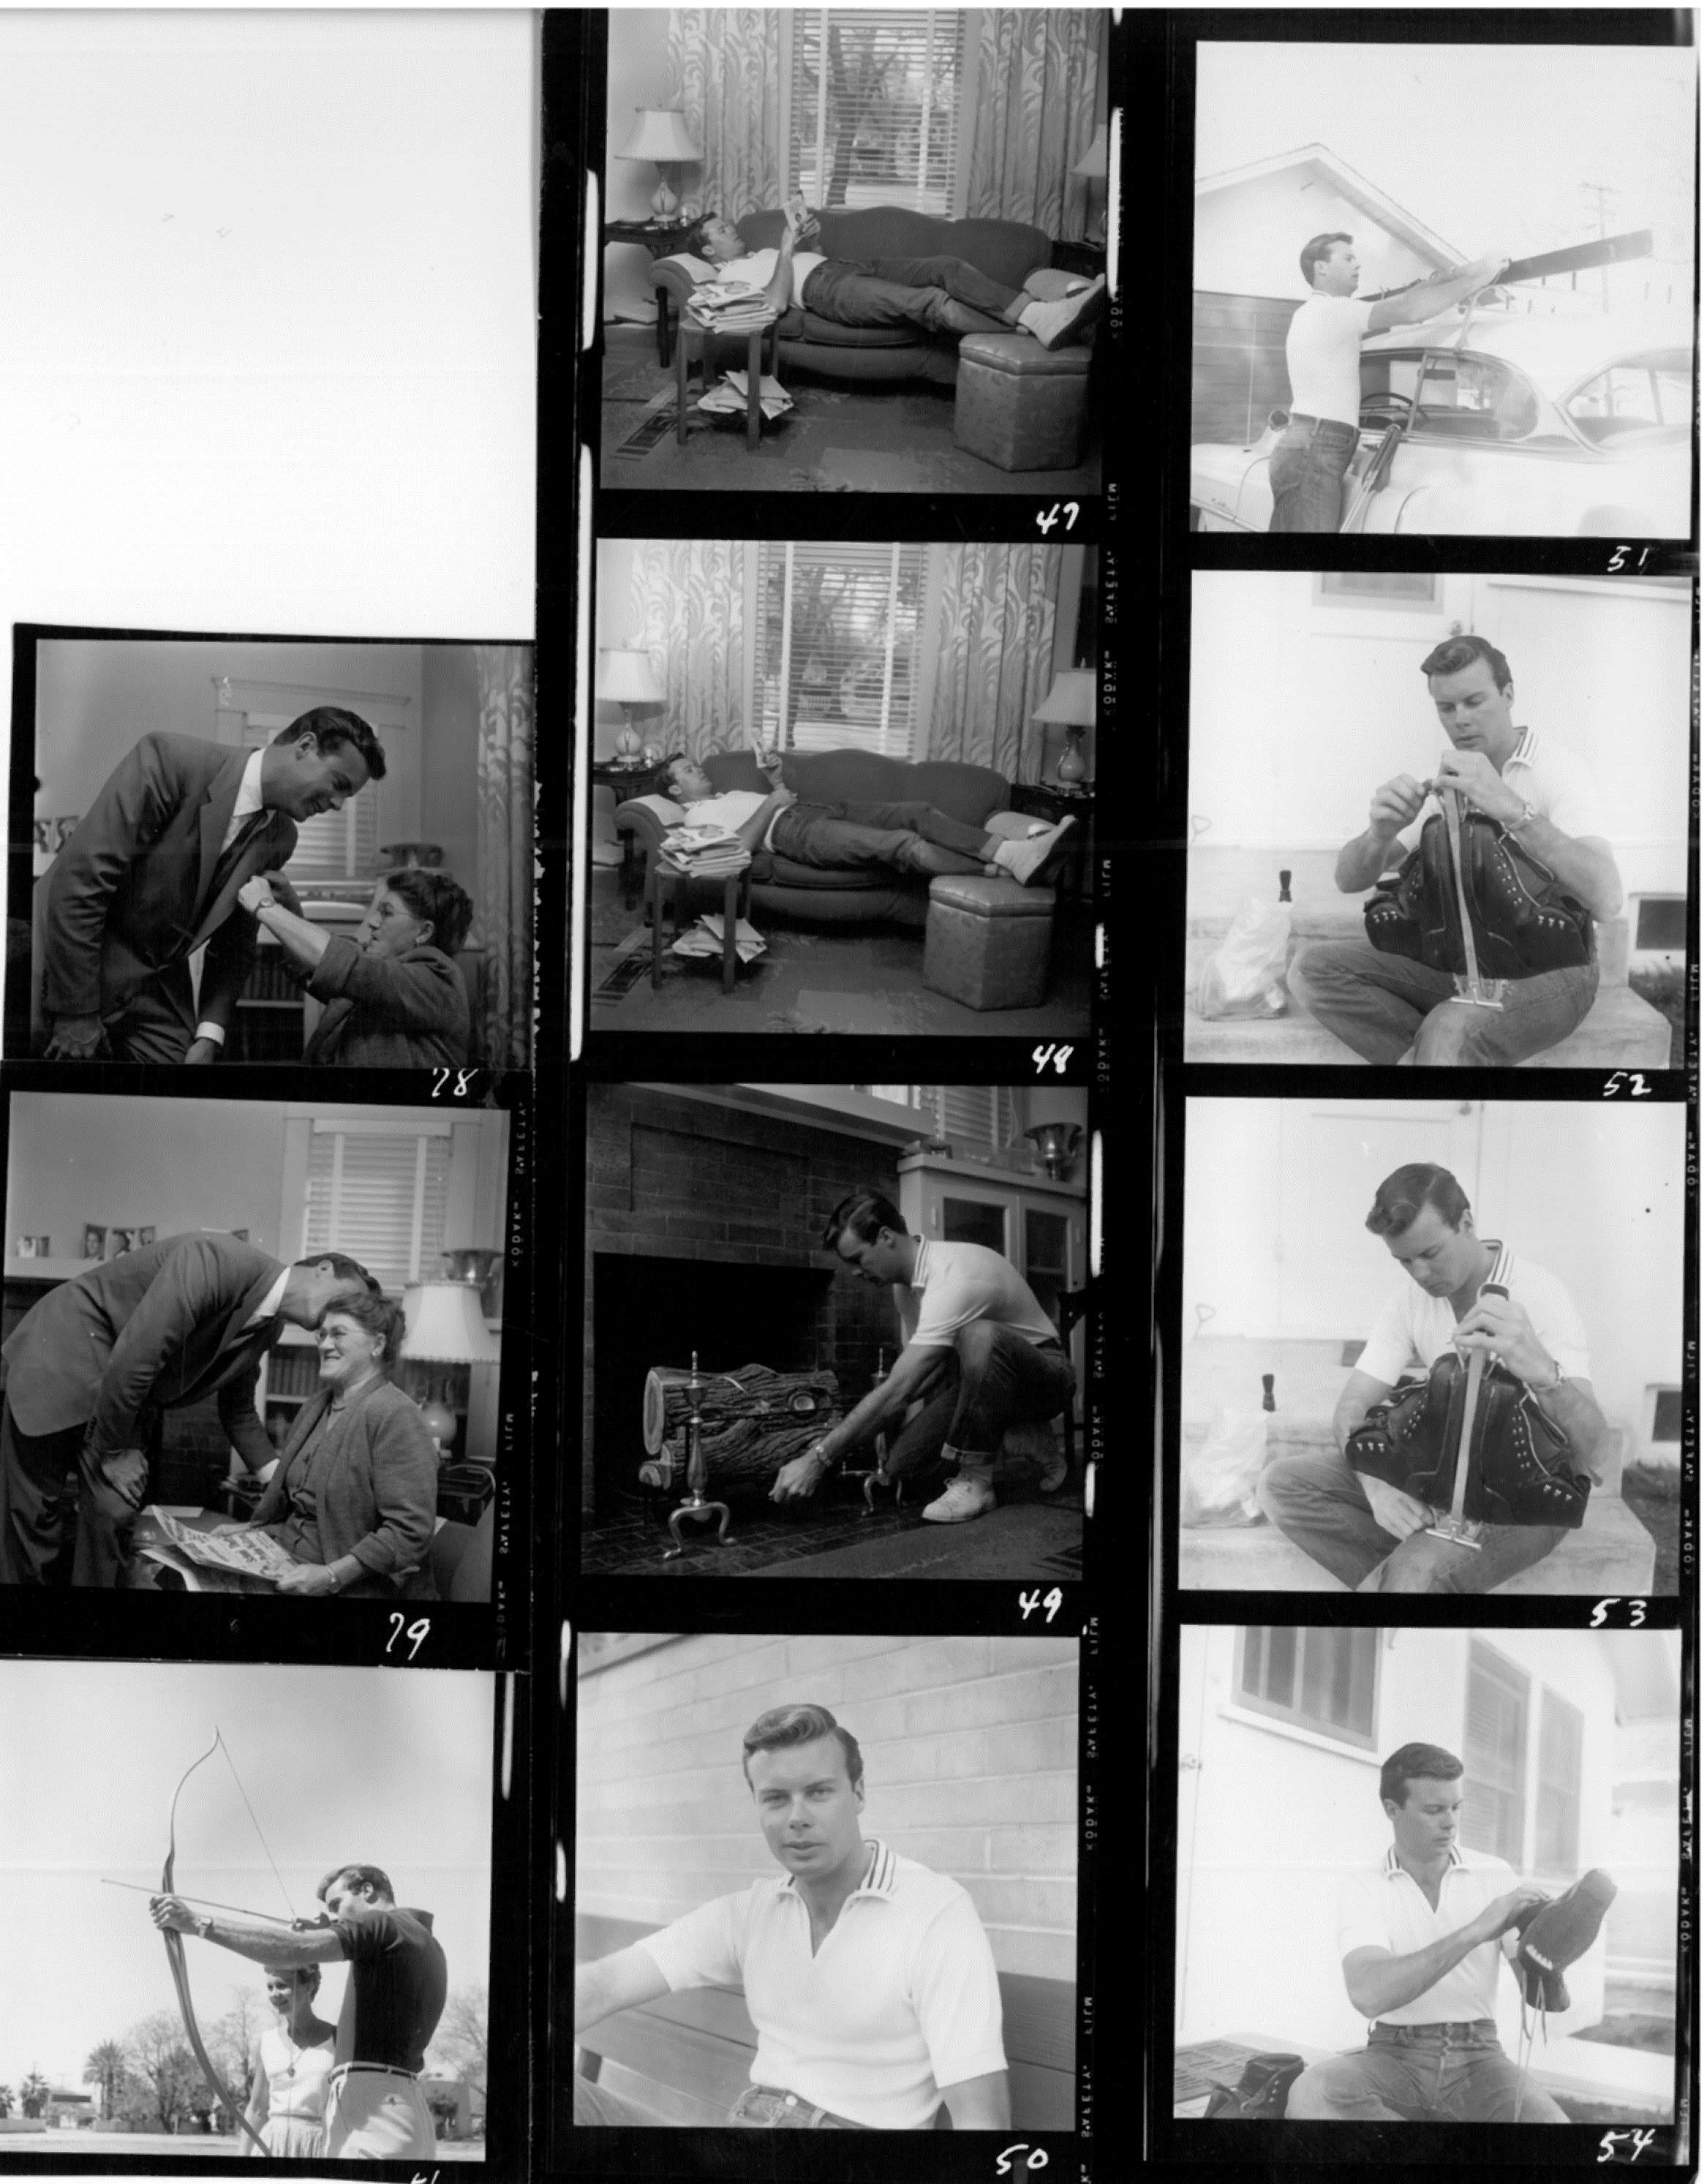  Contact sheet of photos by Larry Barberi for Globe Photos, New York City, for”Weekend with the Folks,”  Screenland,  July 1955. 